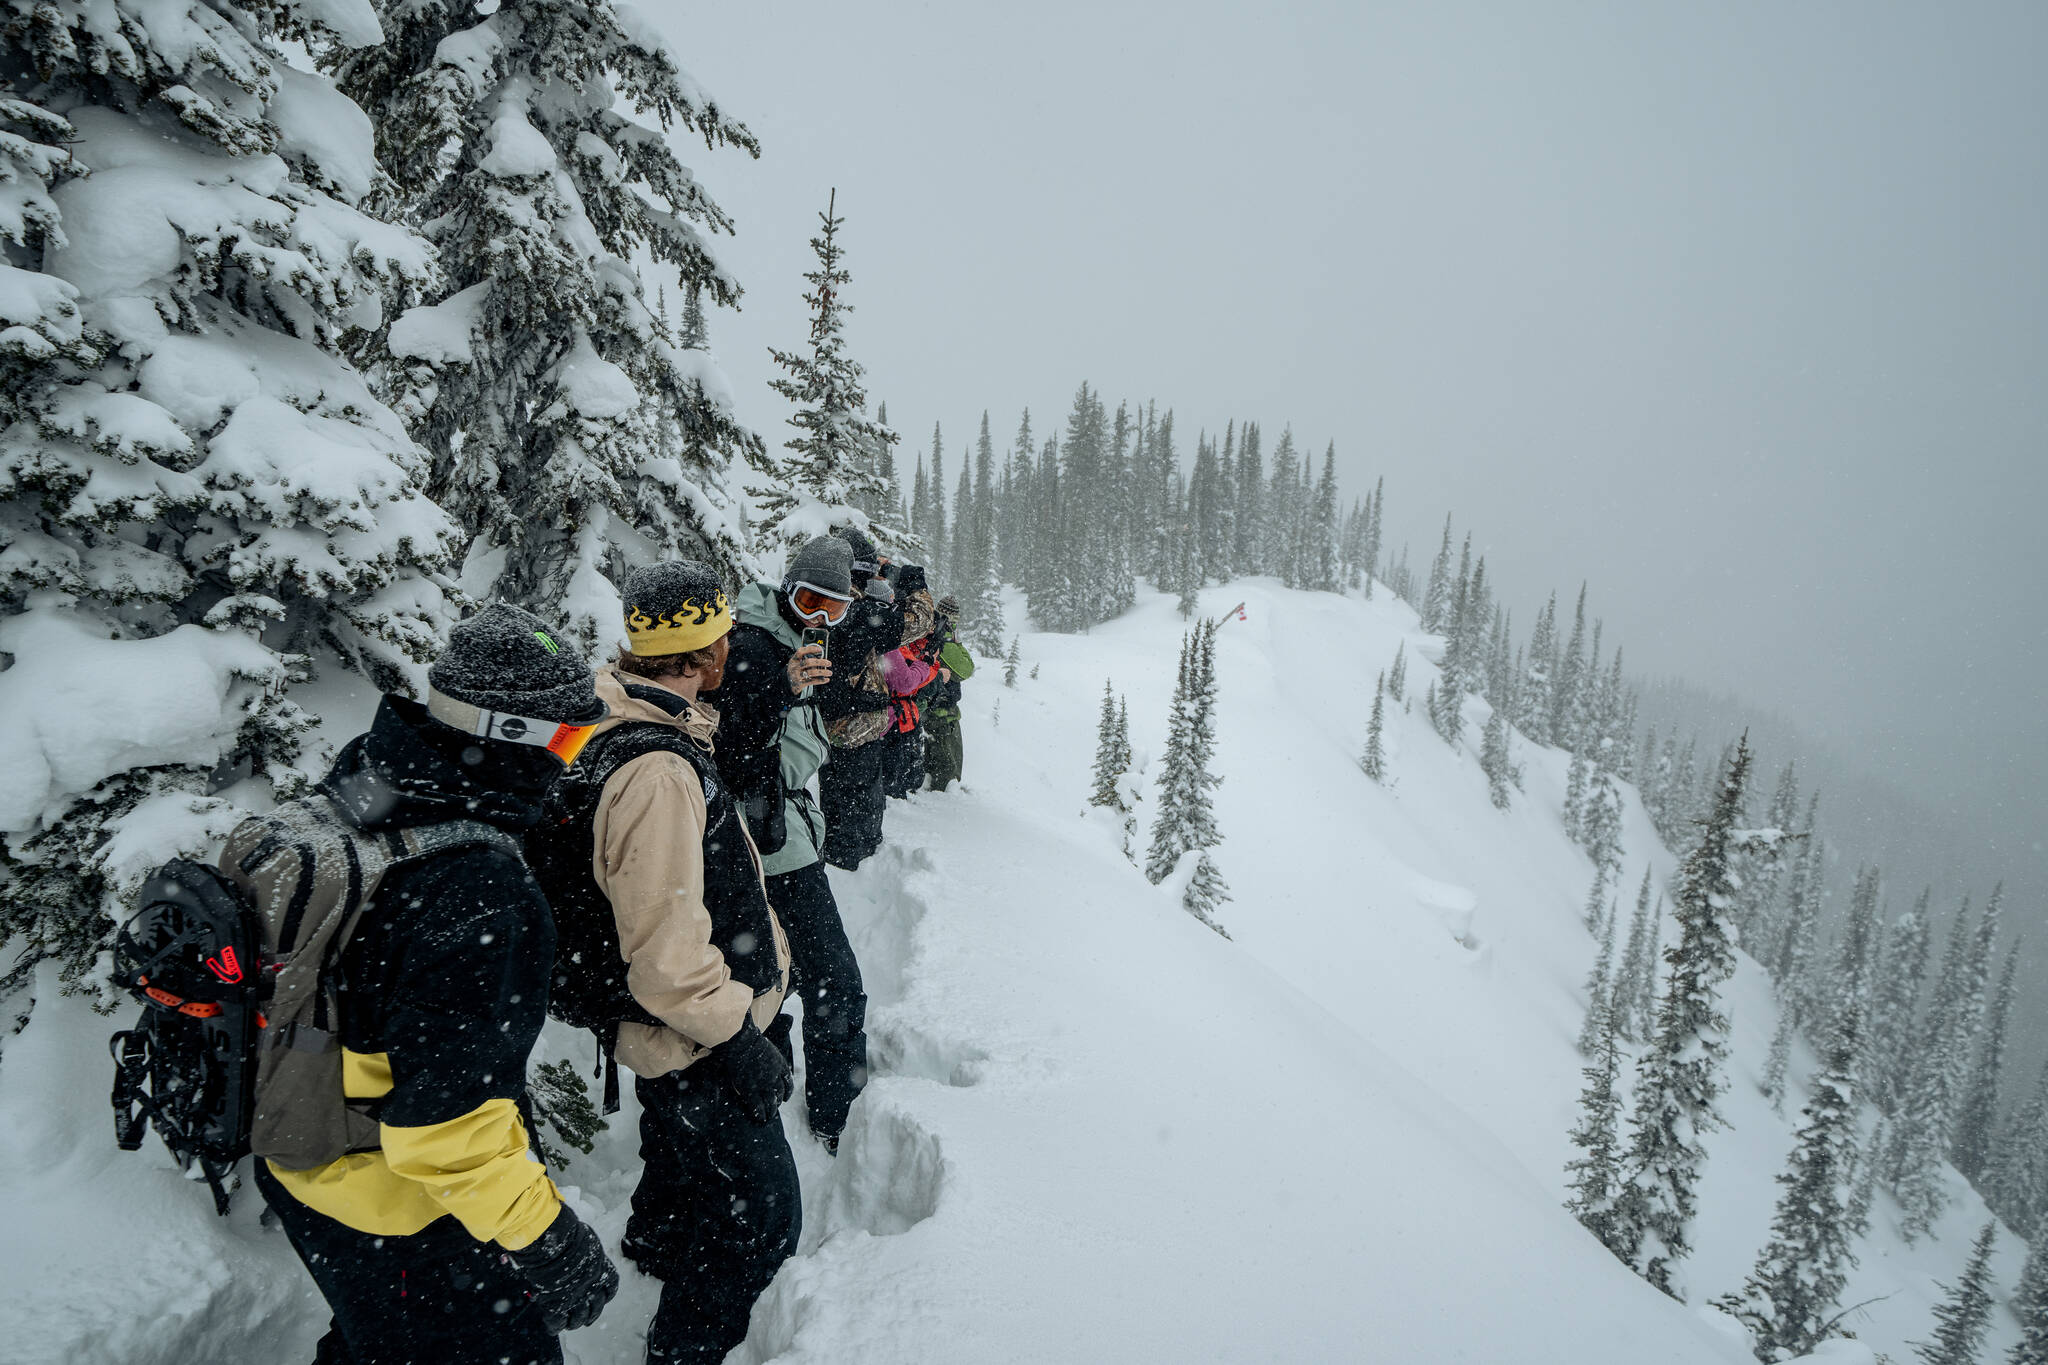 The group of riders eyeing the Revelstoke Mountain Resort venue on Sunday, March 10, during a scouting visit. (Chad Chomlack/Natural Selection Tour)